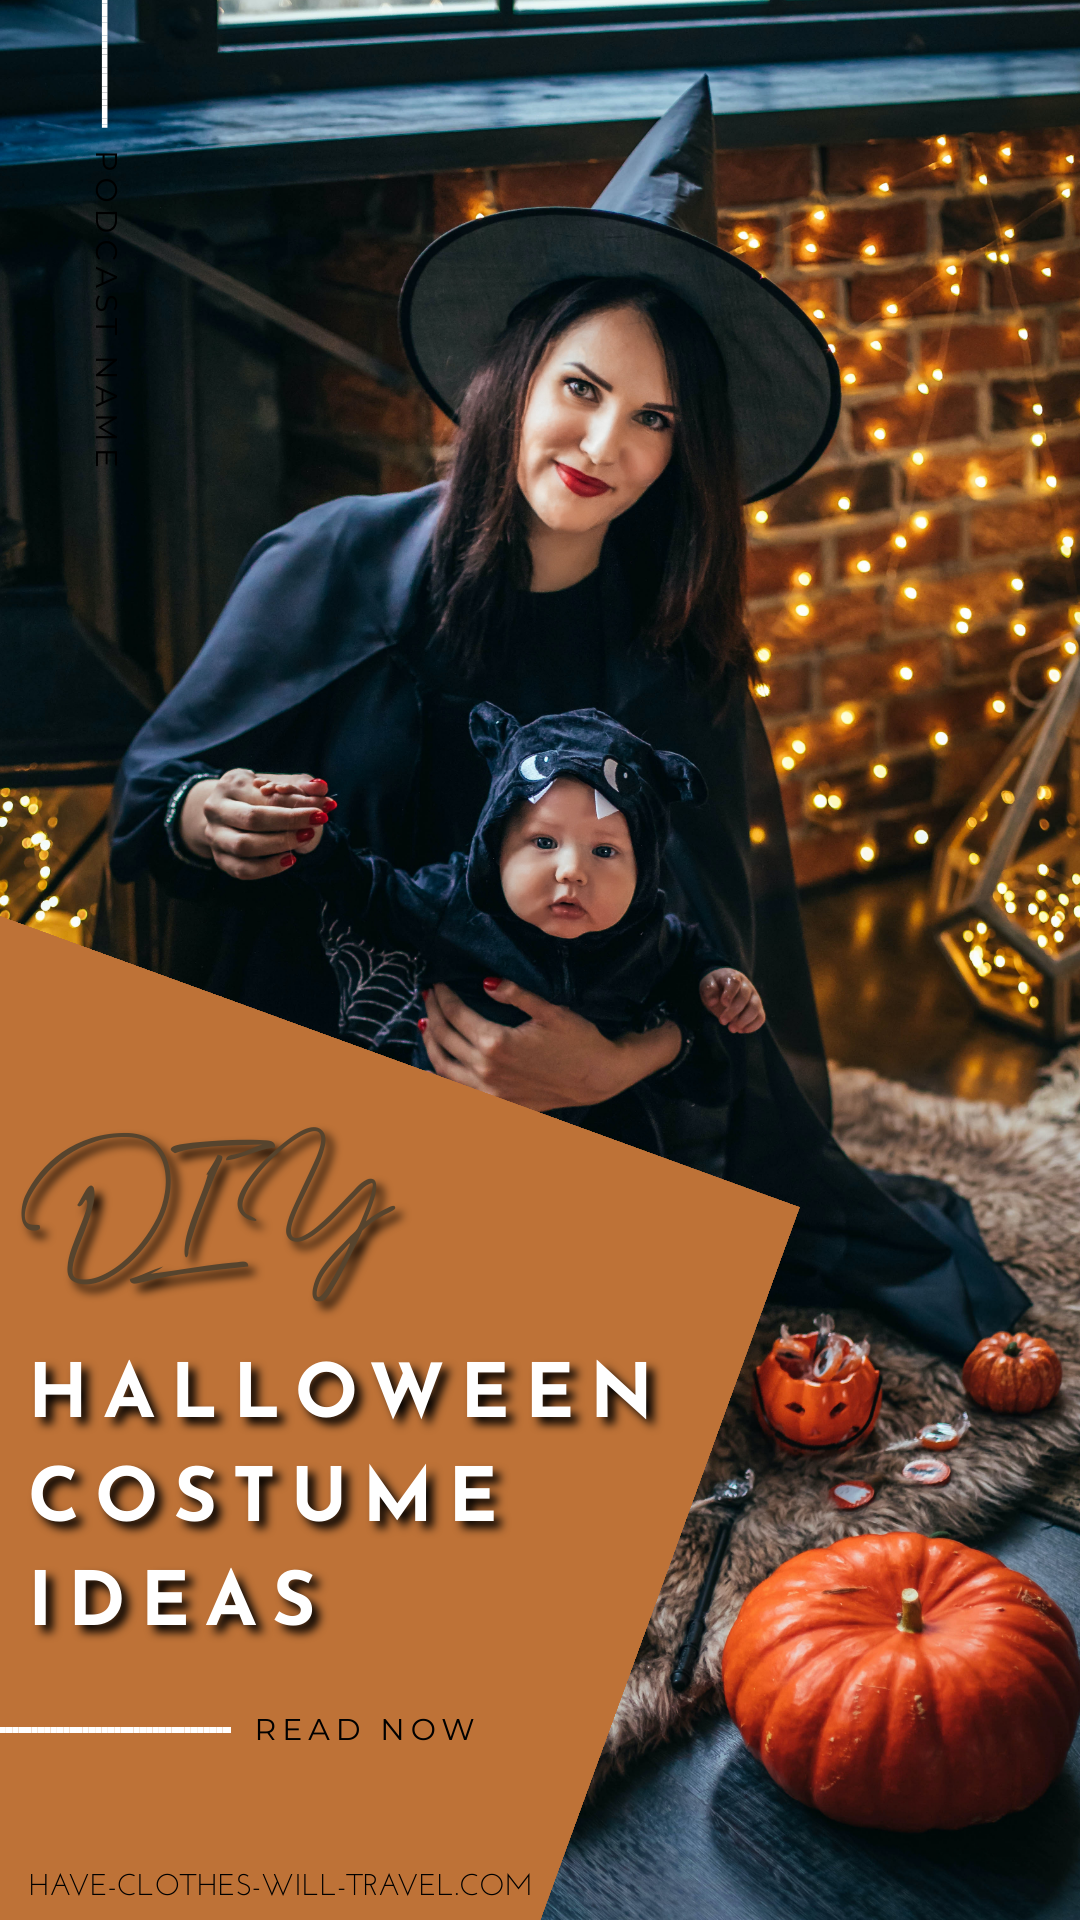 A mother and baby pose together, wearing DIY witch and baby bat Halloween costumes. Text on the bottom of the image reads "DIY Halloween Costume Ideas"